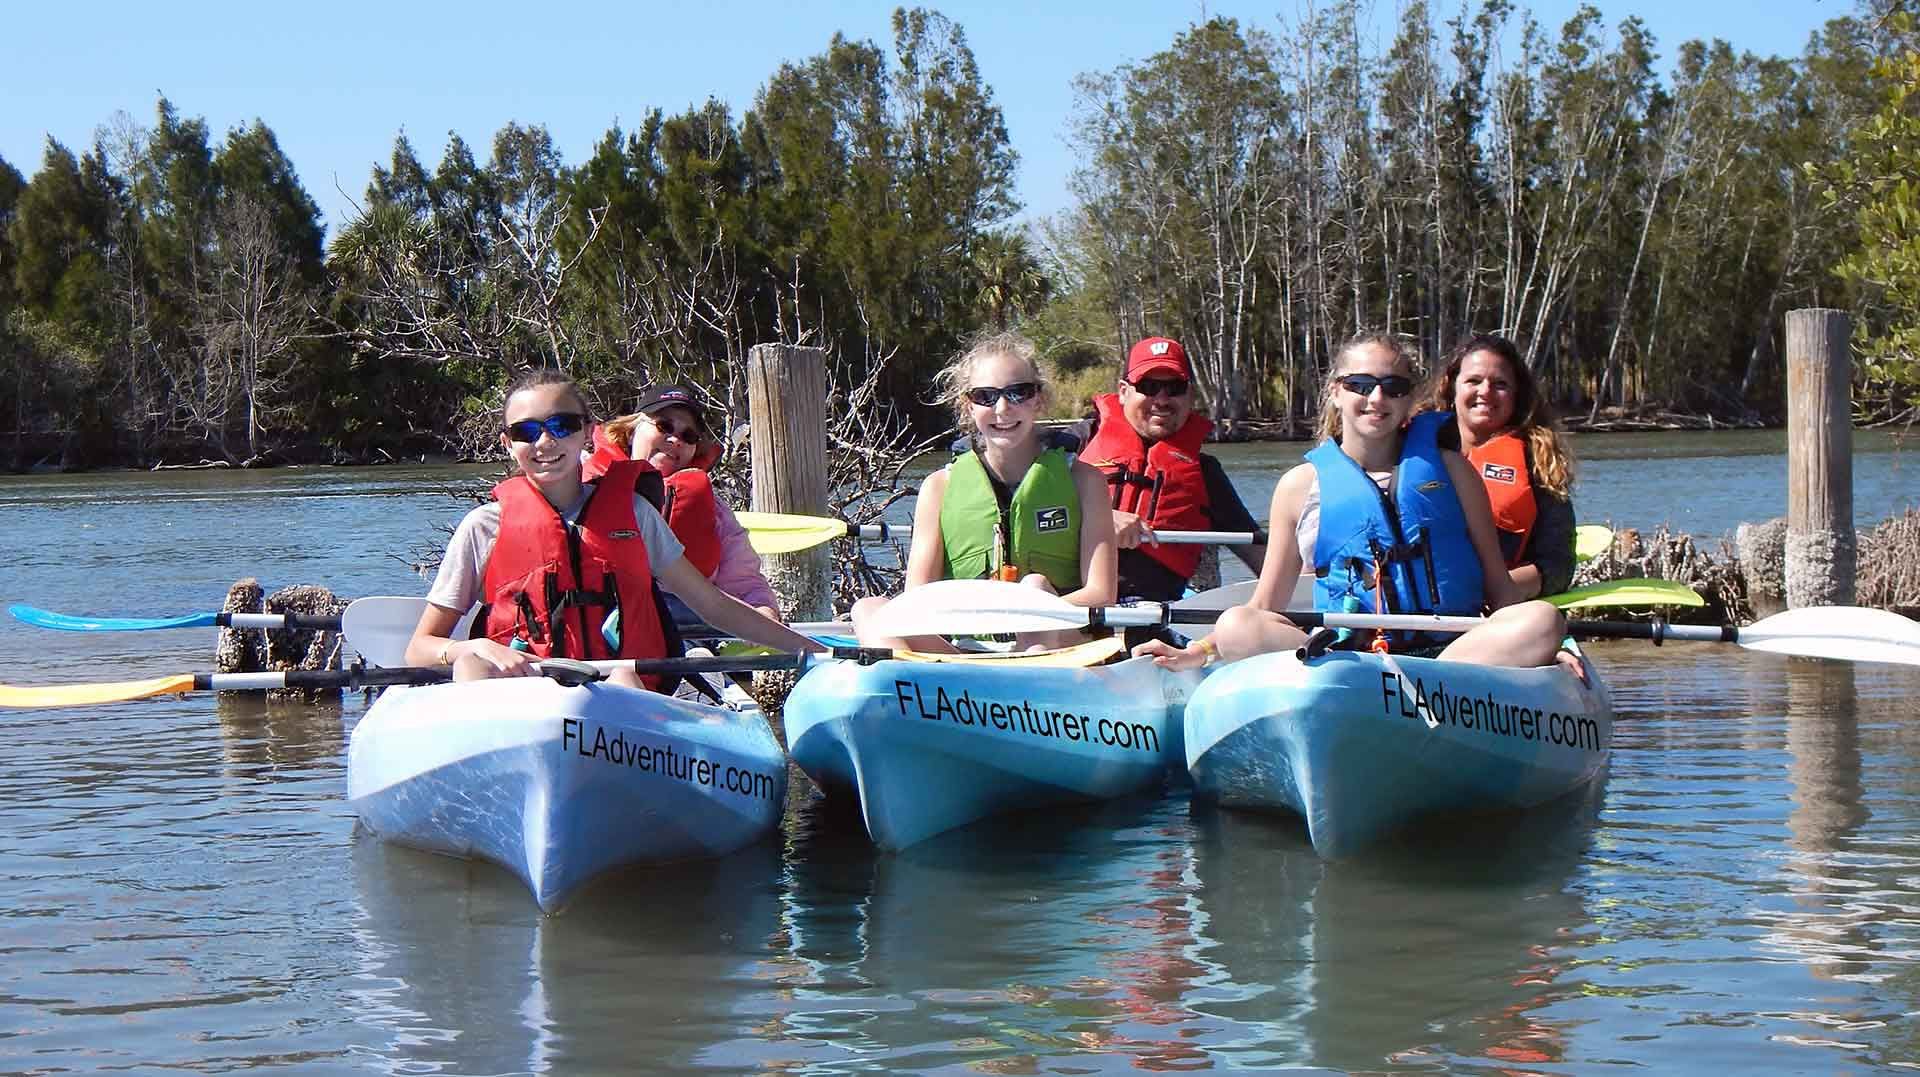 Where can I Kayak in Central Florida Without Sharks and Alligators?